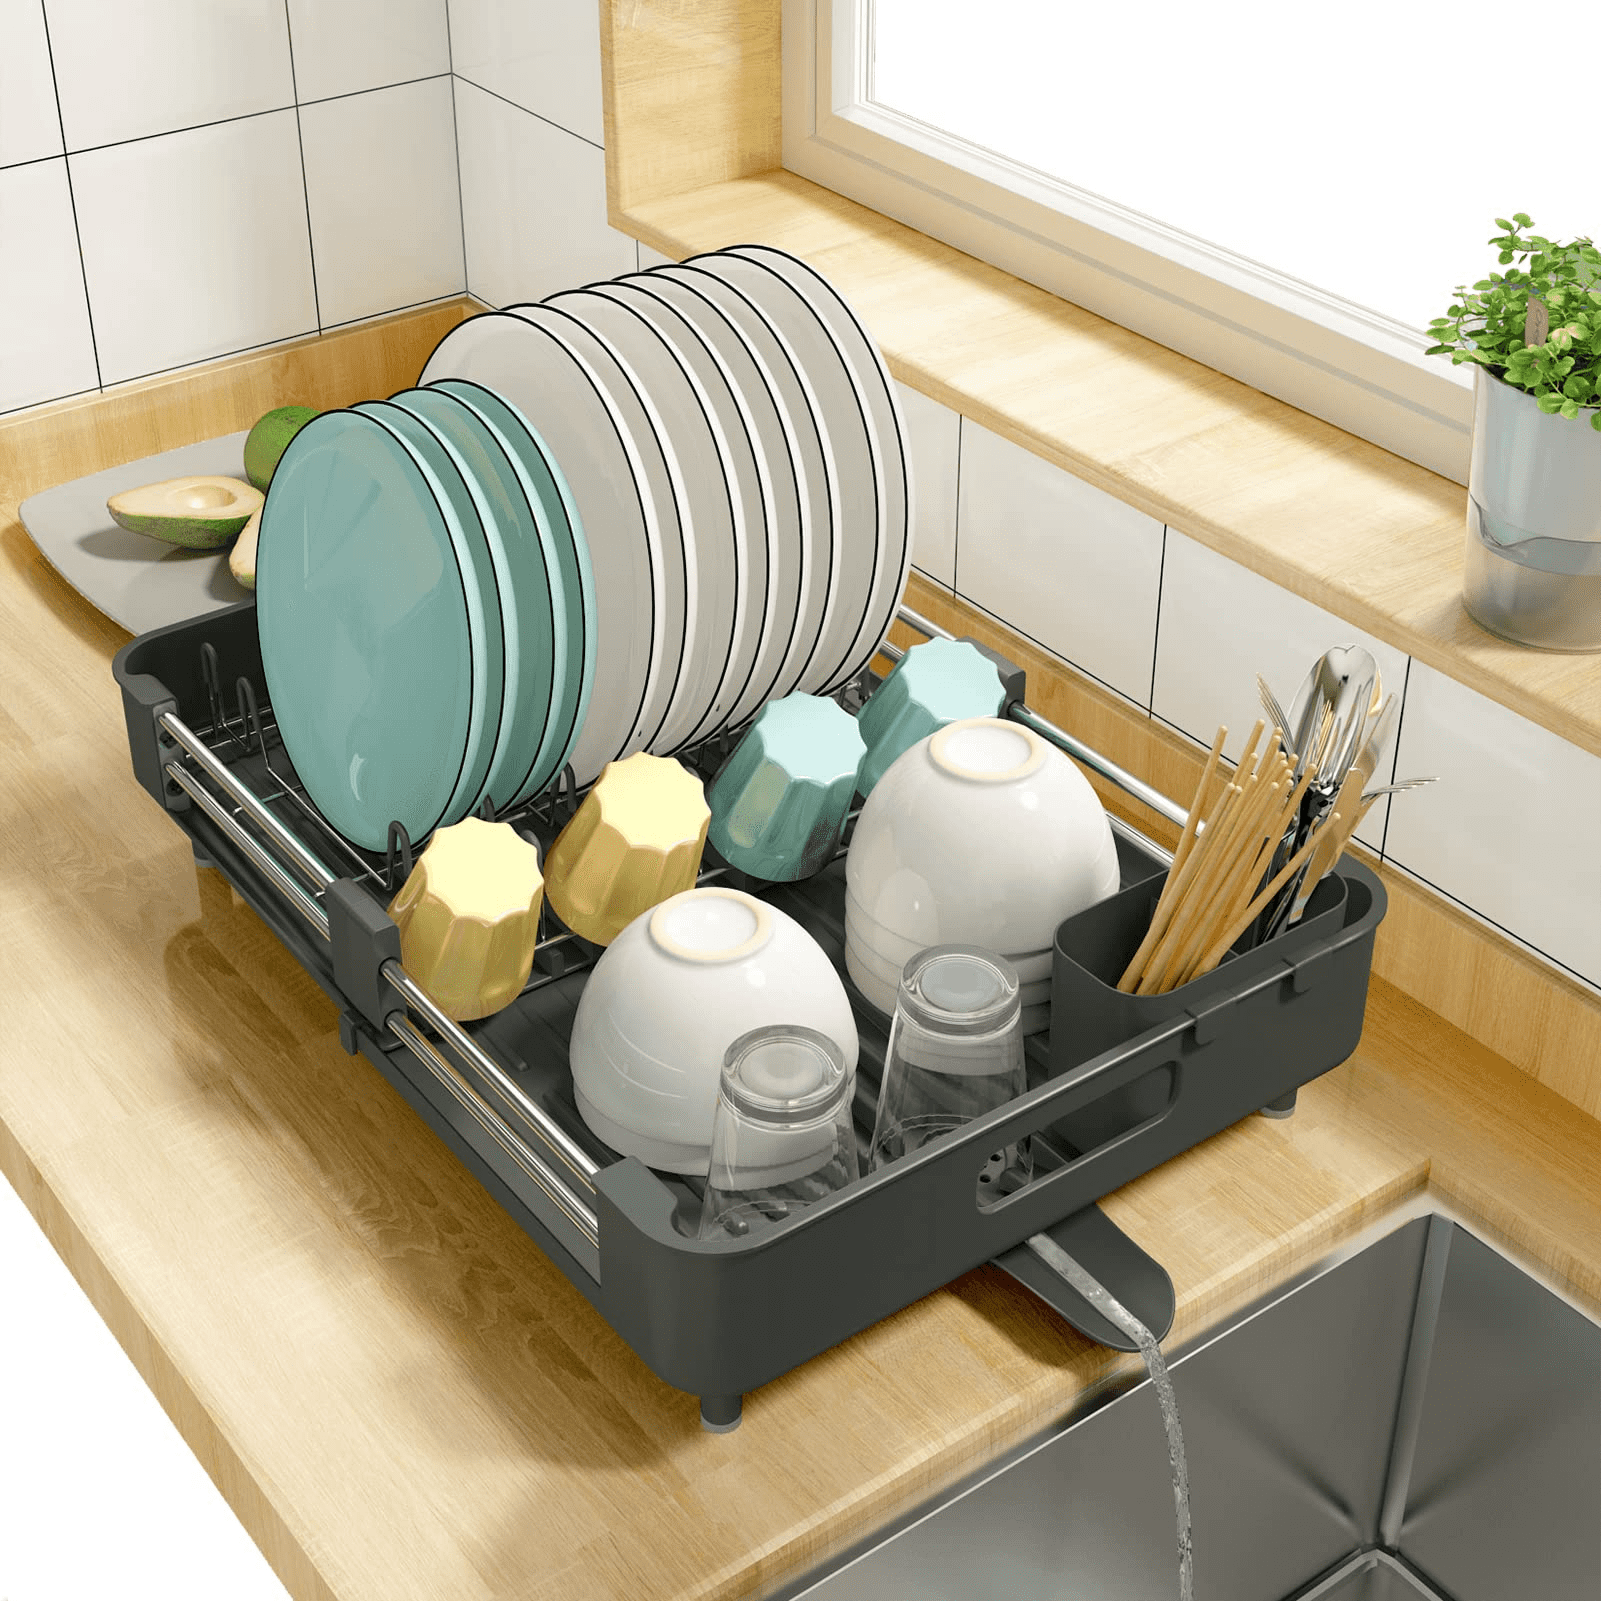 BOOSINY Dish Racks for Kitchen Counter, Stainless Steel Dish Drying Rack  with Drainboard Set, Dish Drainer with Utensil Holder, Cup Holder